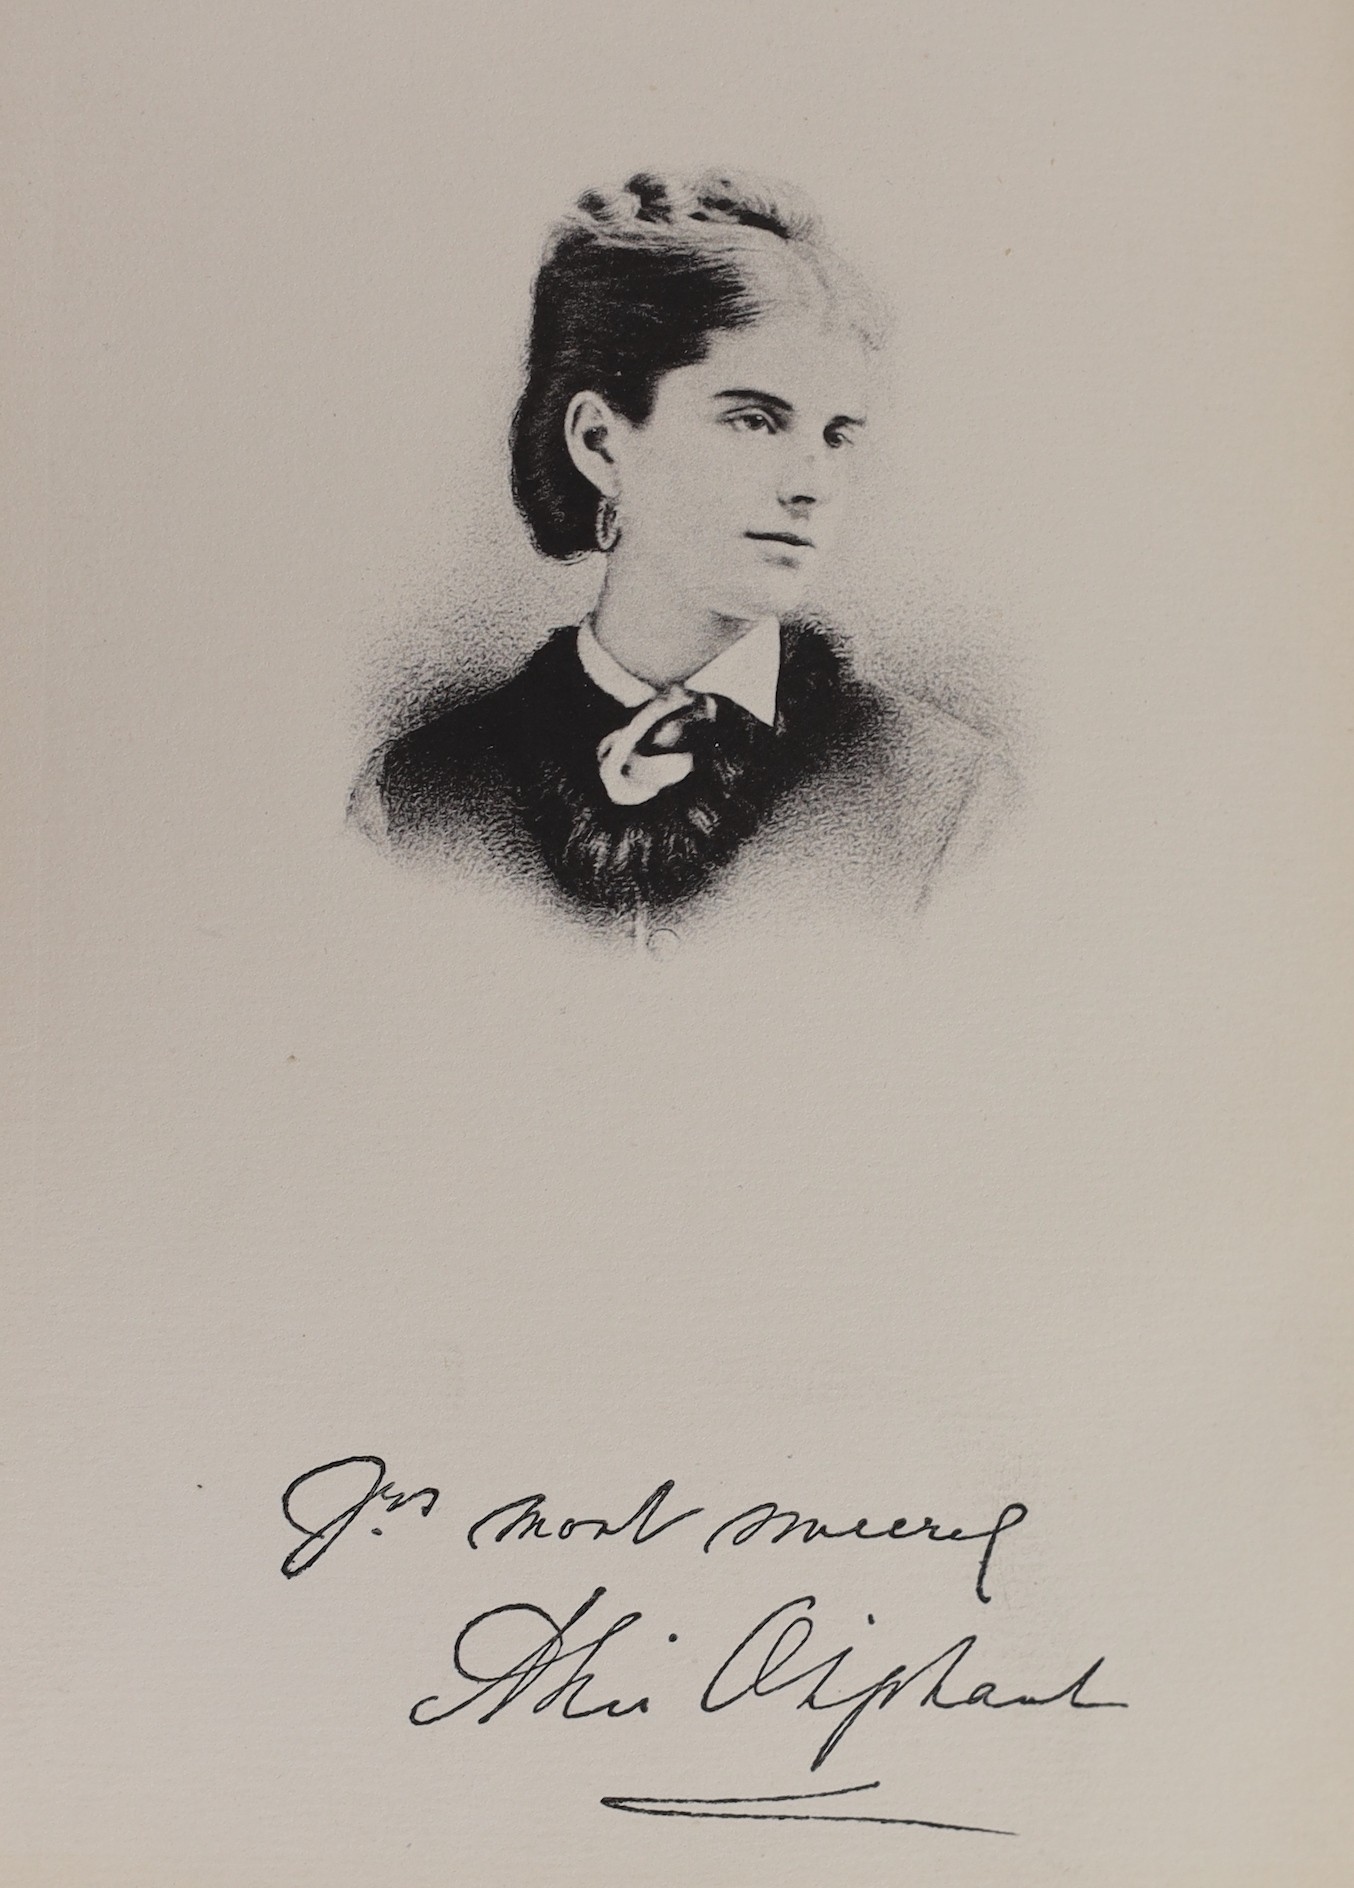 Oliphant, Margaret Oliphant W. - Memoir of the Life of Laurence Oliphant and of Alice Oliphant, his wife. First Edition, 2 vols. portrait frontispcs., half titles, publisher's catalogue and adverts.; original gilt cloth.